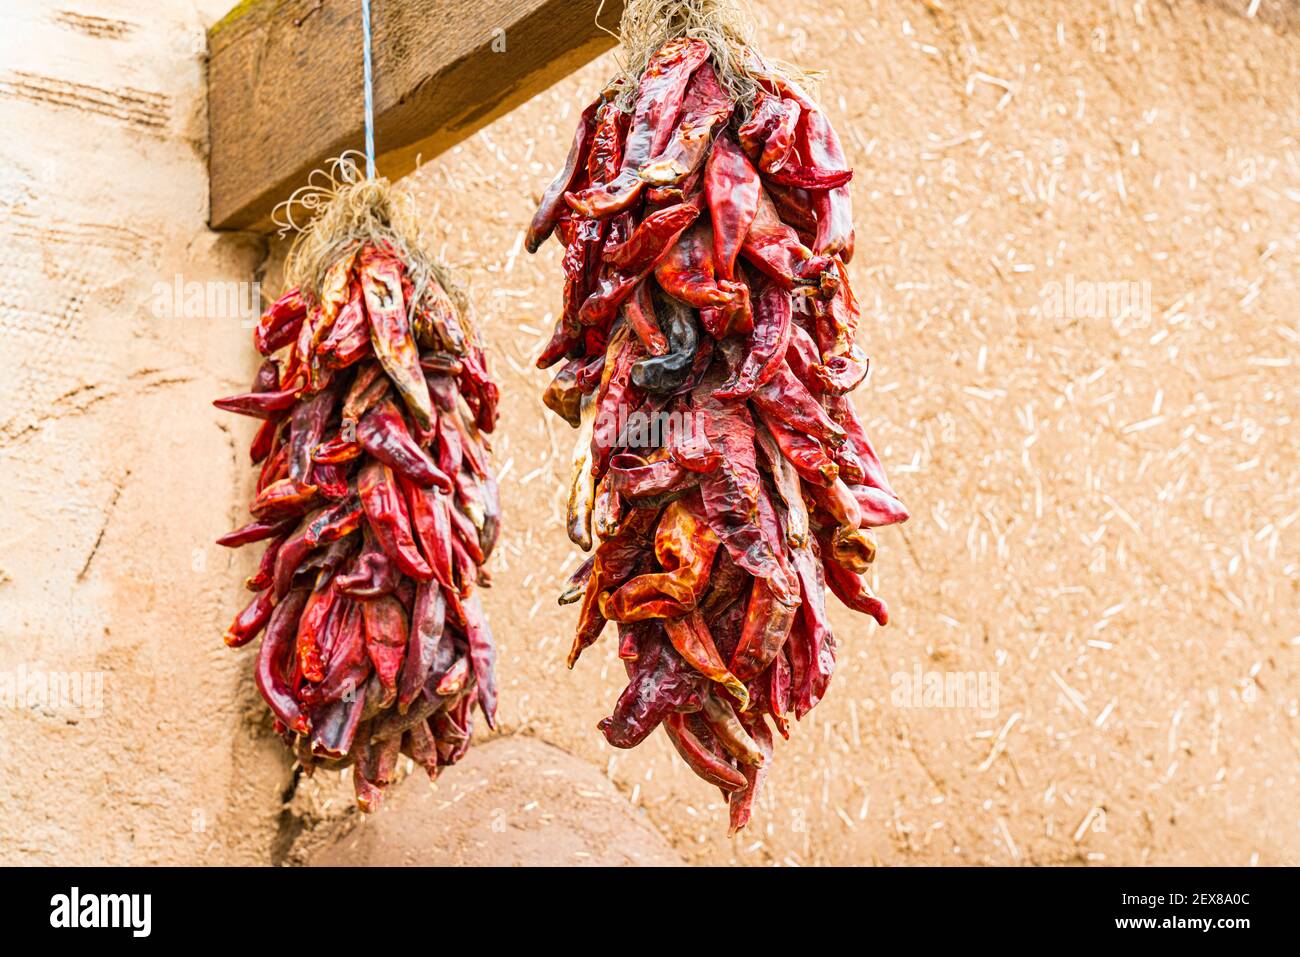 Two bunches of dried hot red chili peppers hanging outside of an adobe building in New Mexico Stock Photo